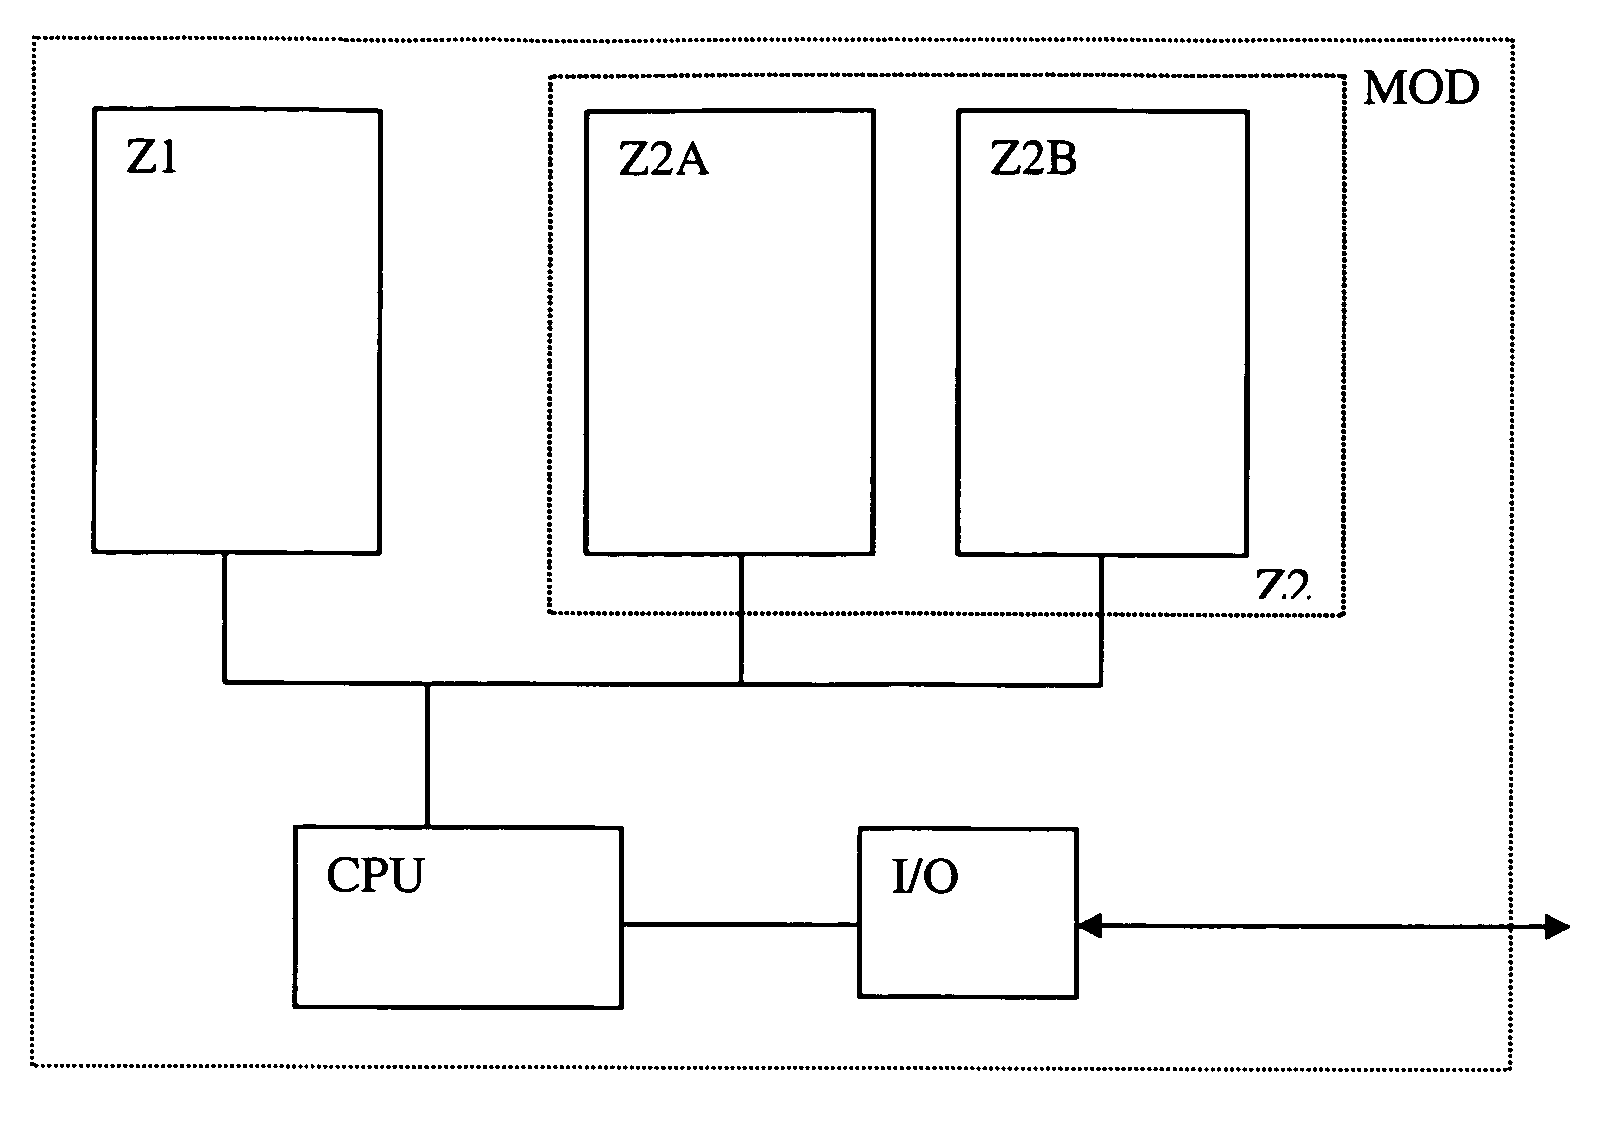 Generating a root key for decryption of a transmission key allowing secure communications